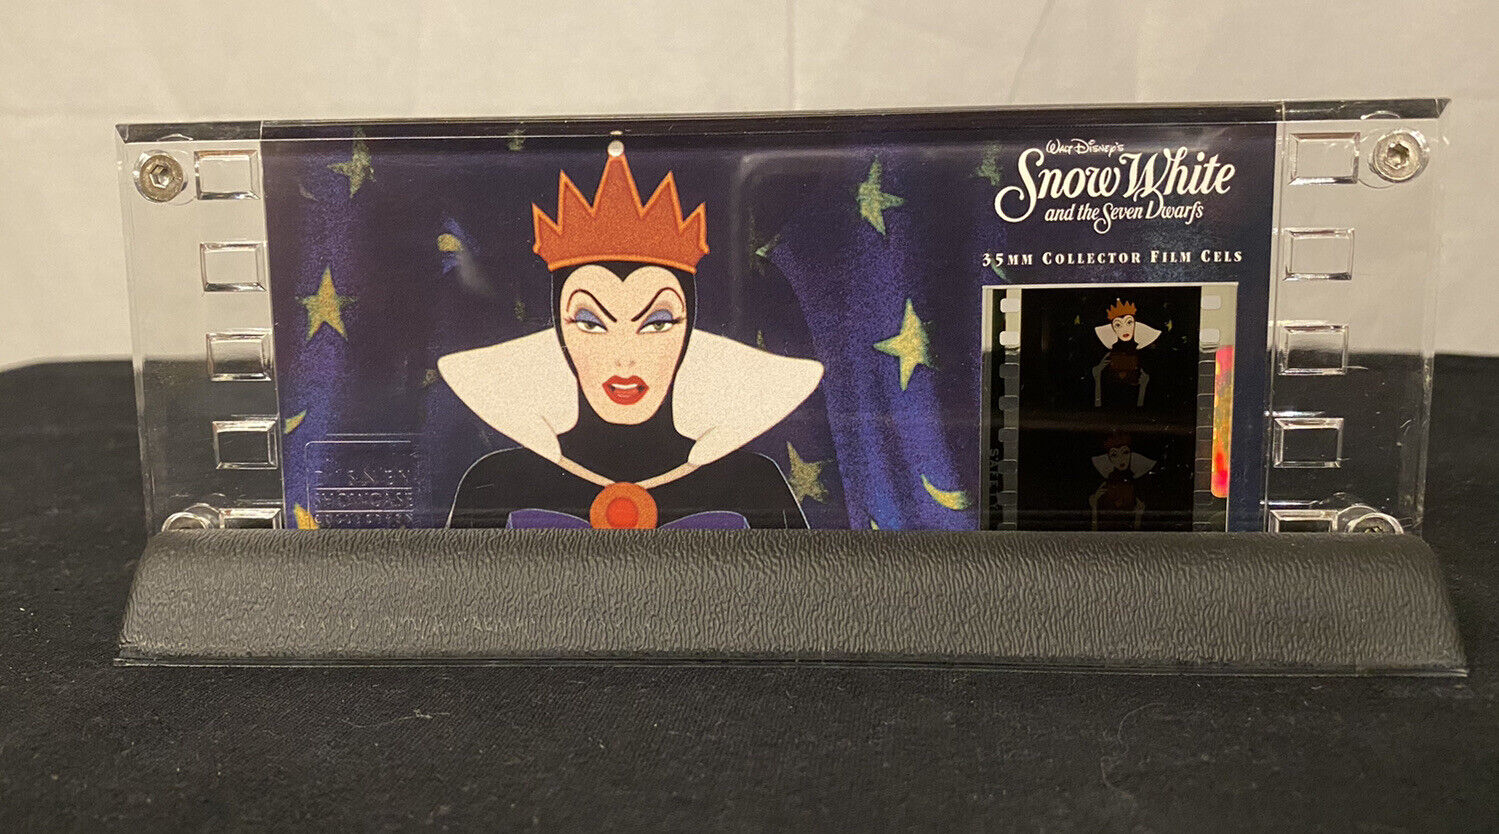 WDCC Disney Snow White * Evil Queen Willitts Collection 35mm Collector Film Cels